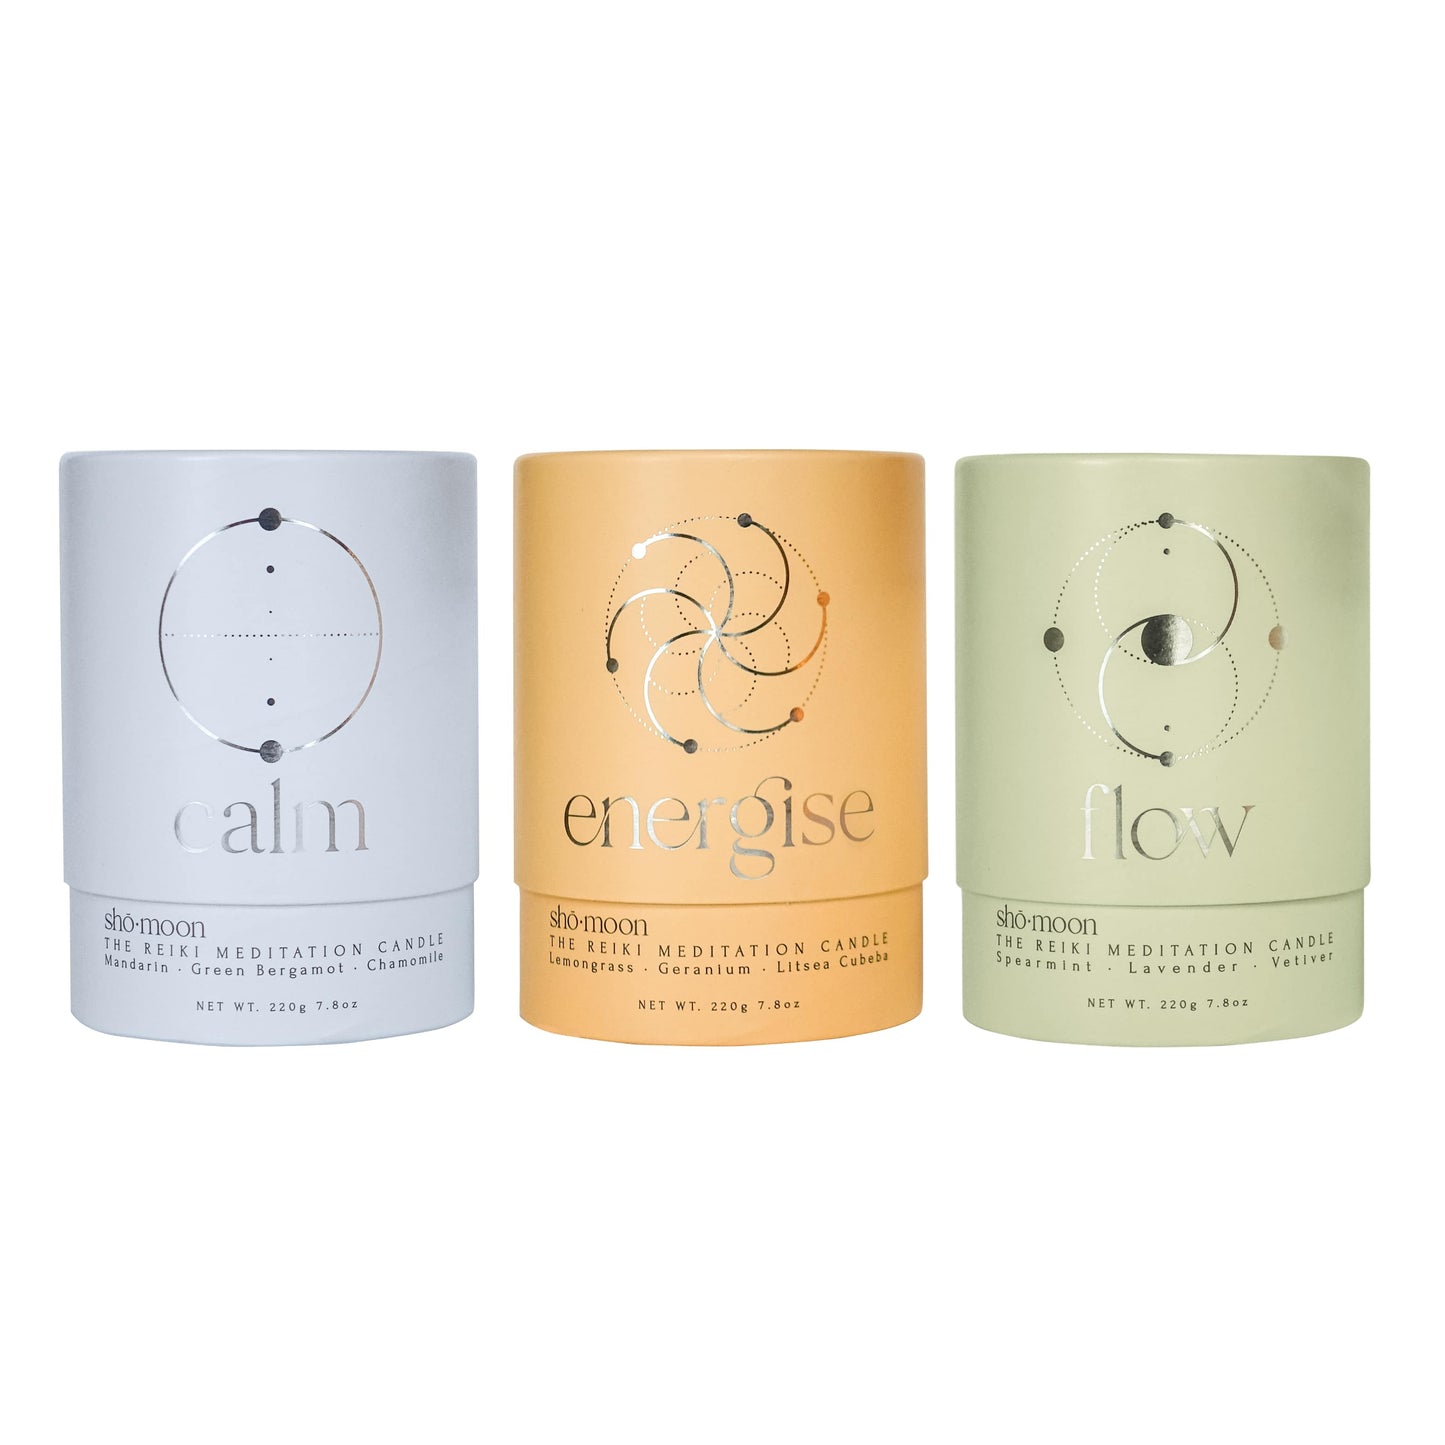 Set of three shō-moon Natural Aromatherapy Meditation Candles for subscription: Energise, Flow and Calm